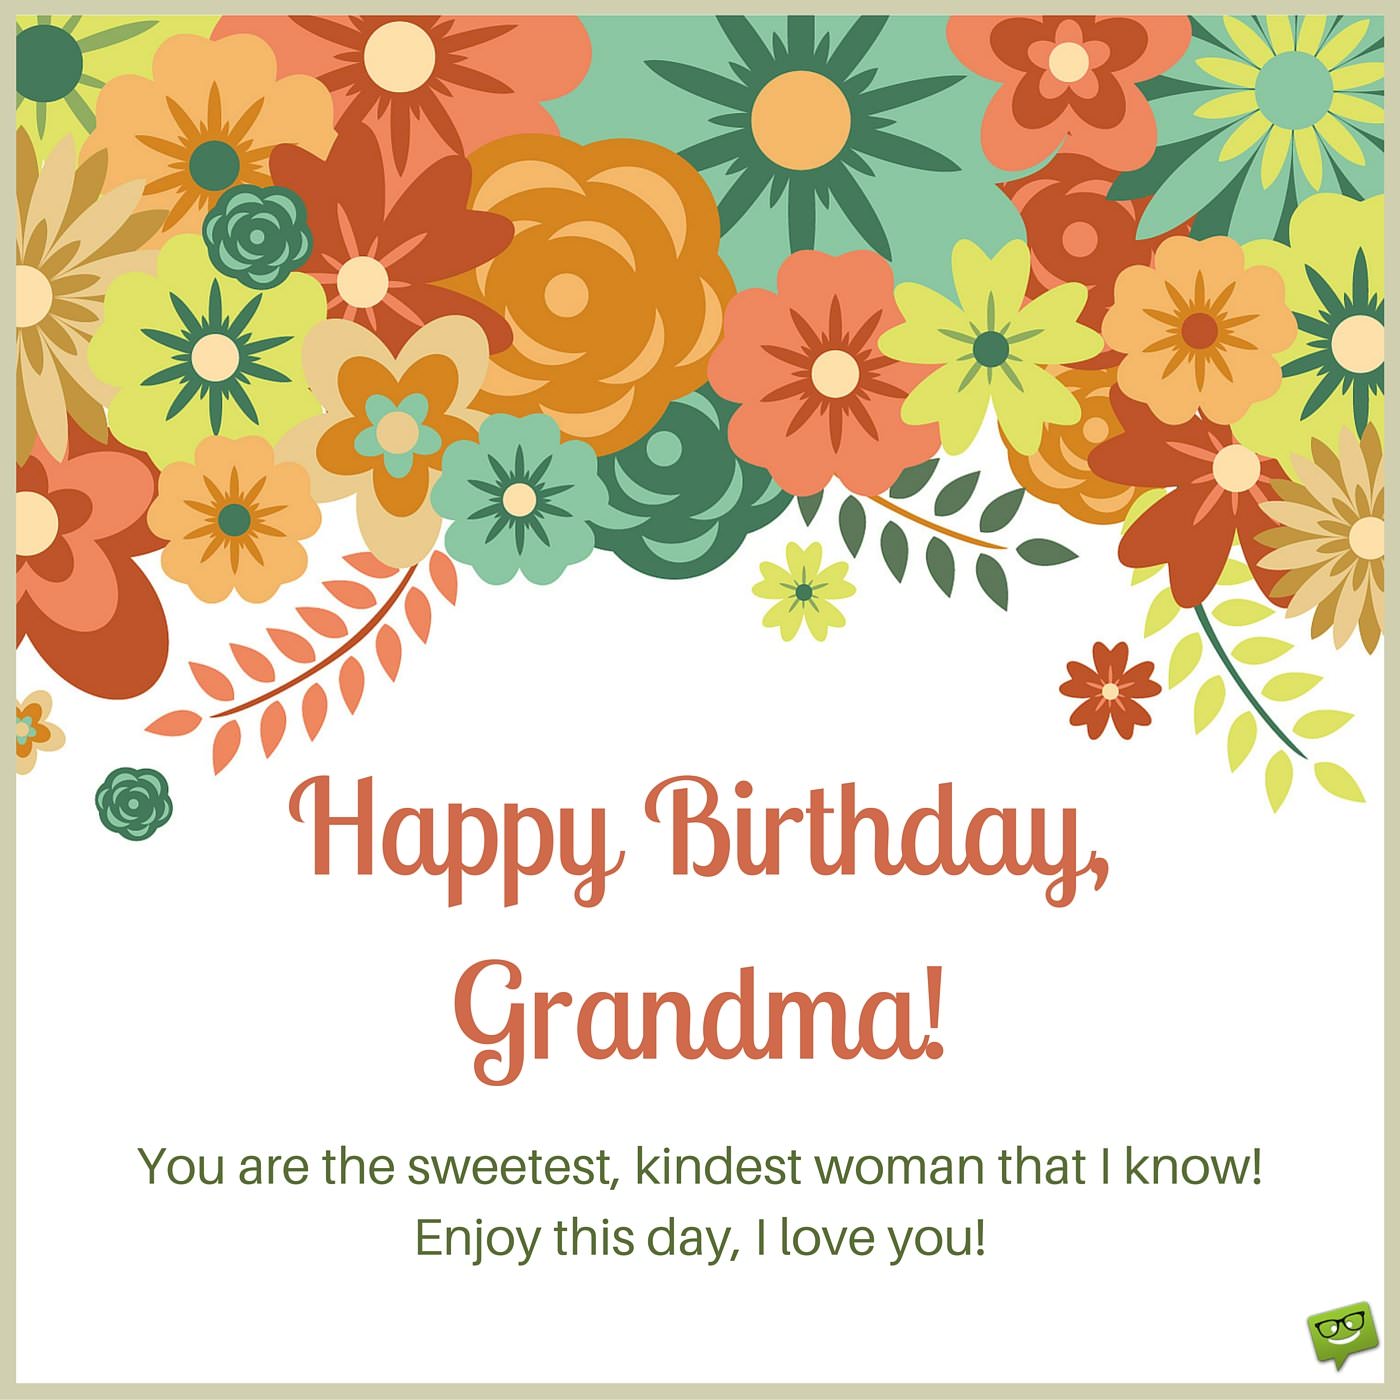 70 Touching Birthday Wishes For Grandma s Special Day